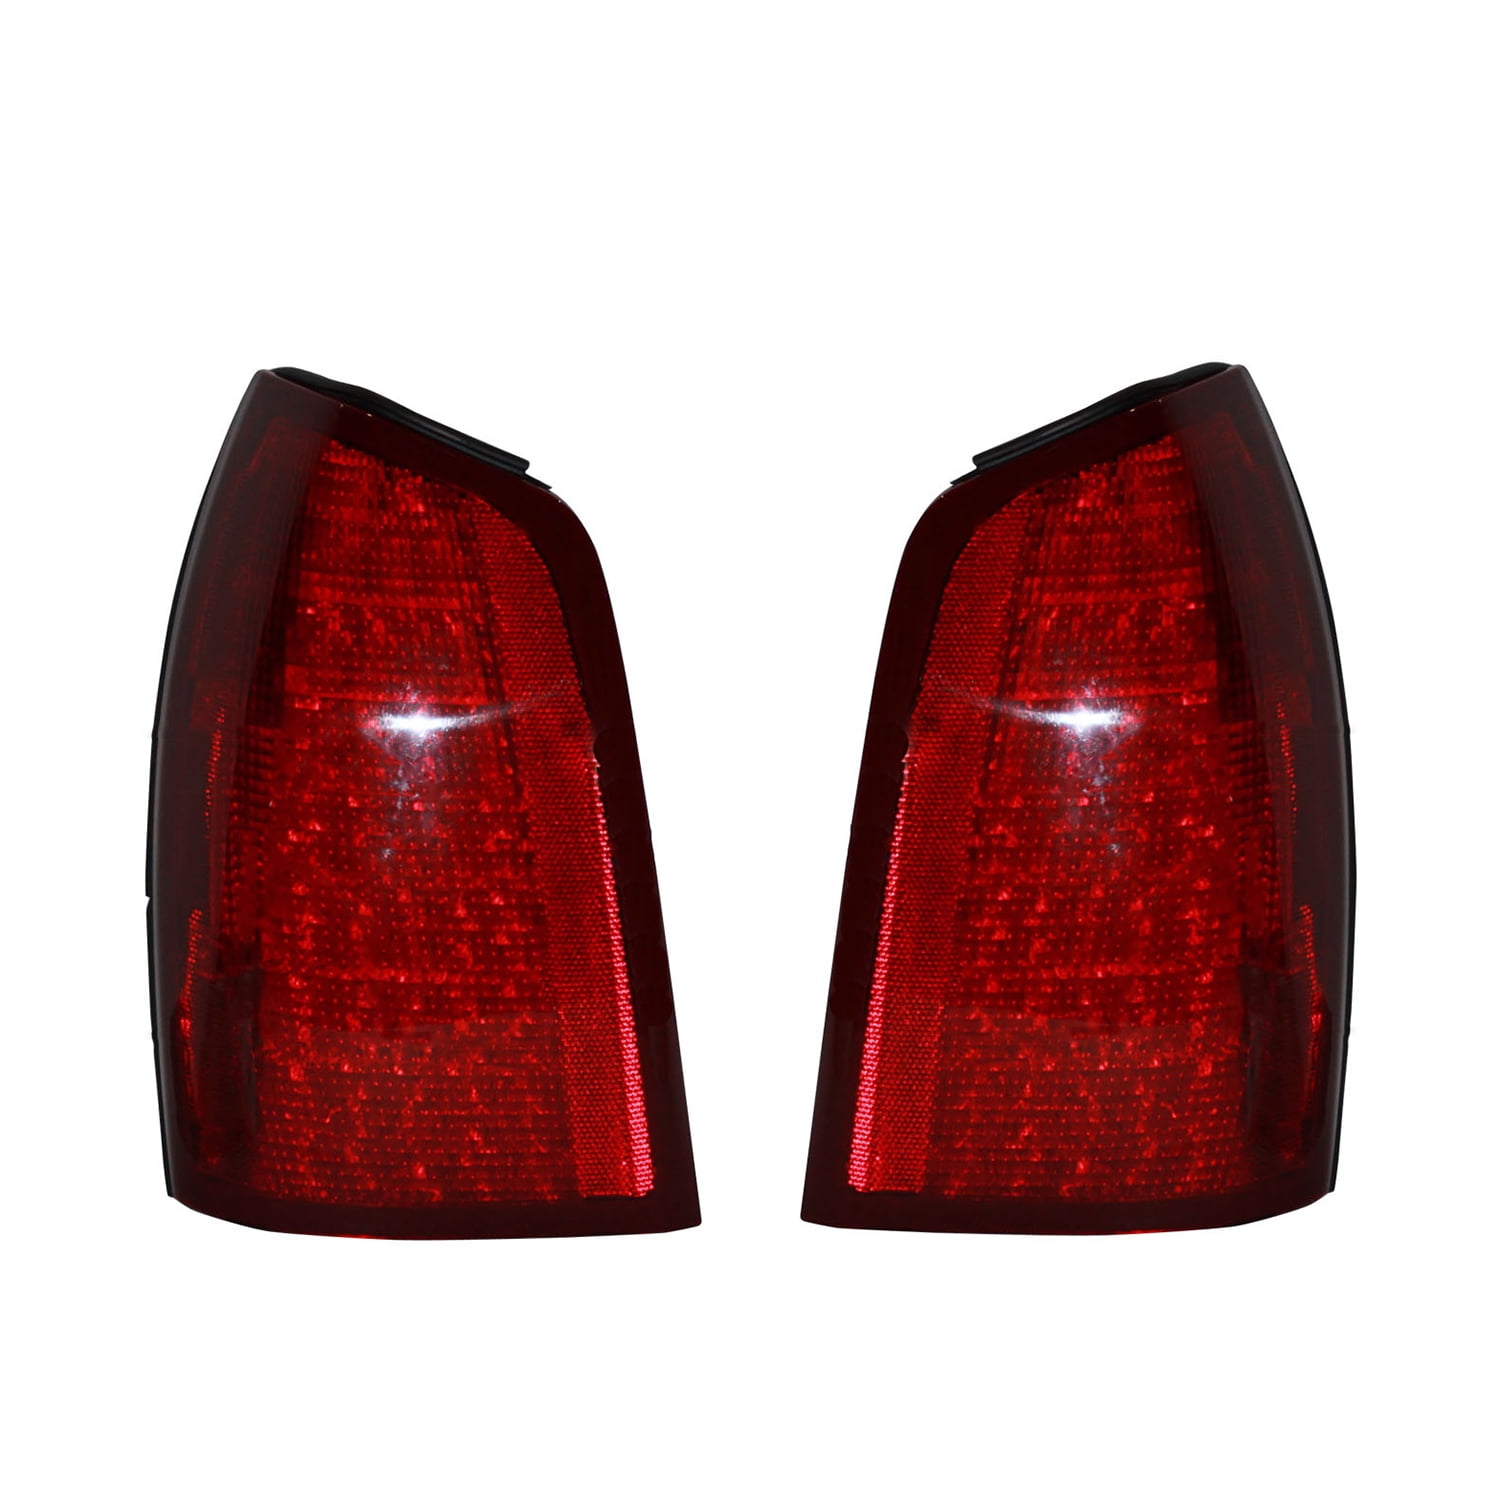 2003 Cadillac Deville Tail Light Bulb Replacement